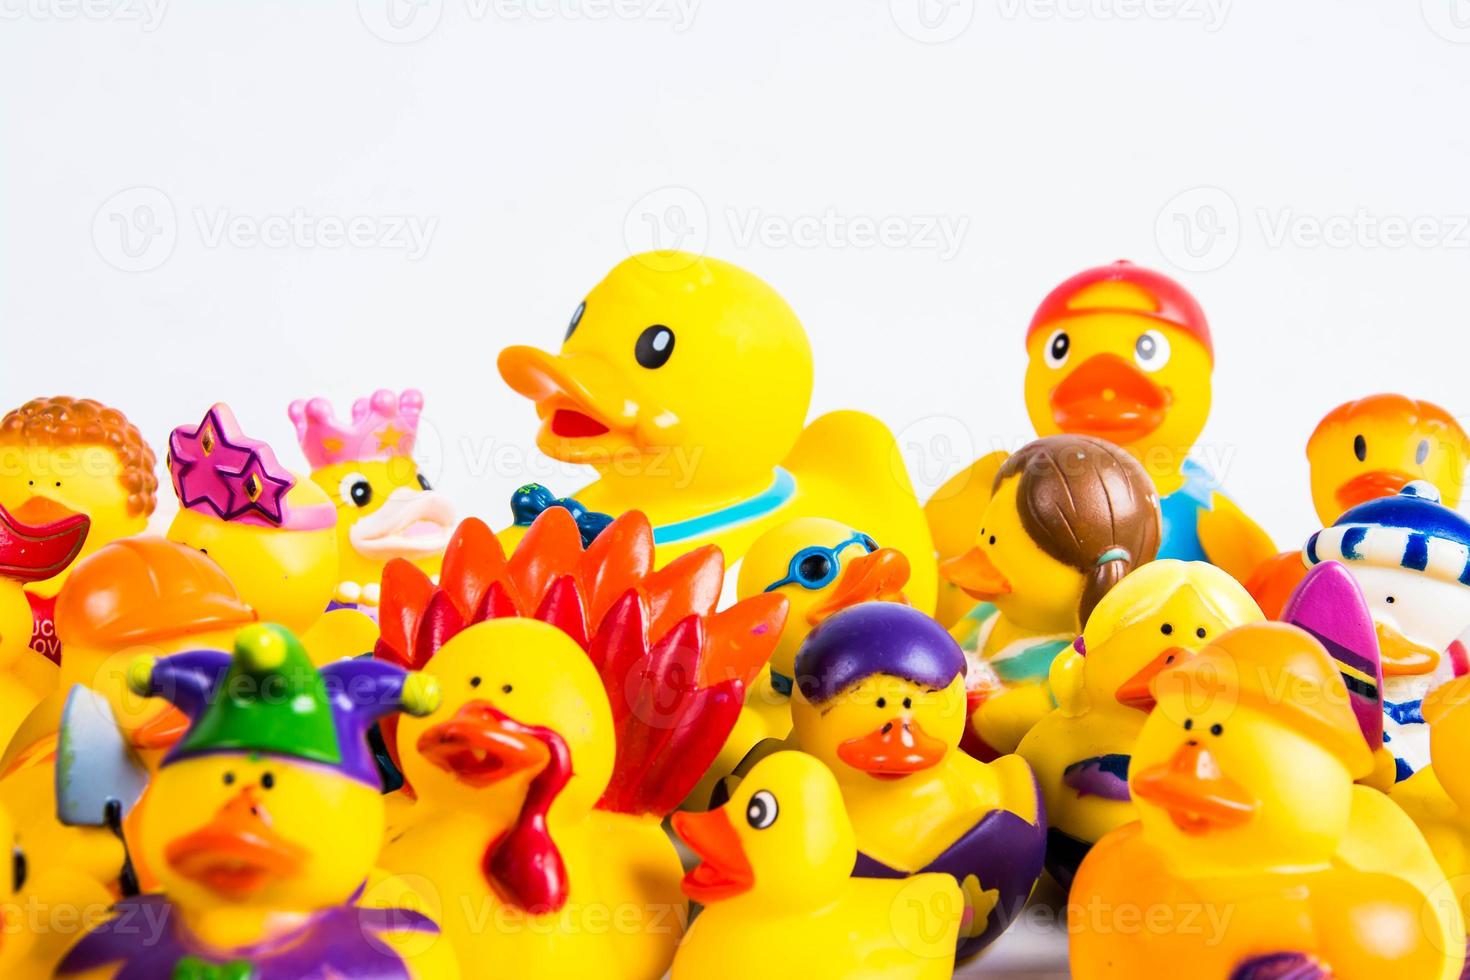 bath duck on white background duck toy Cute rubber duck photo